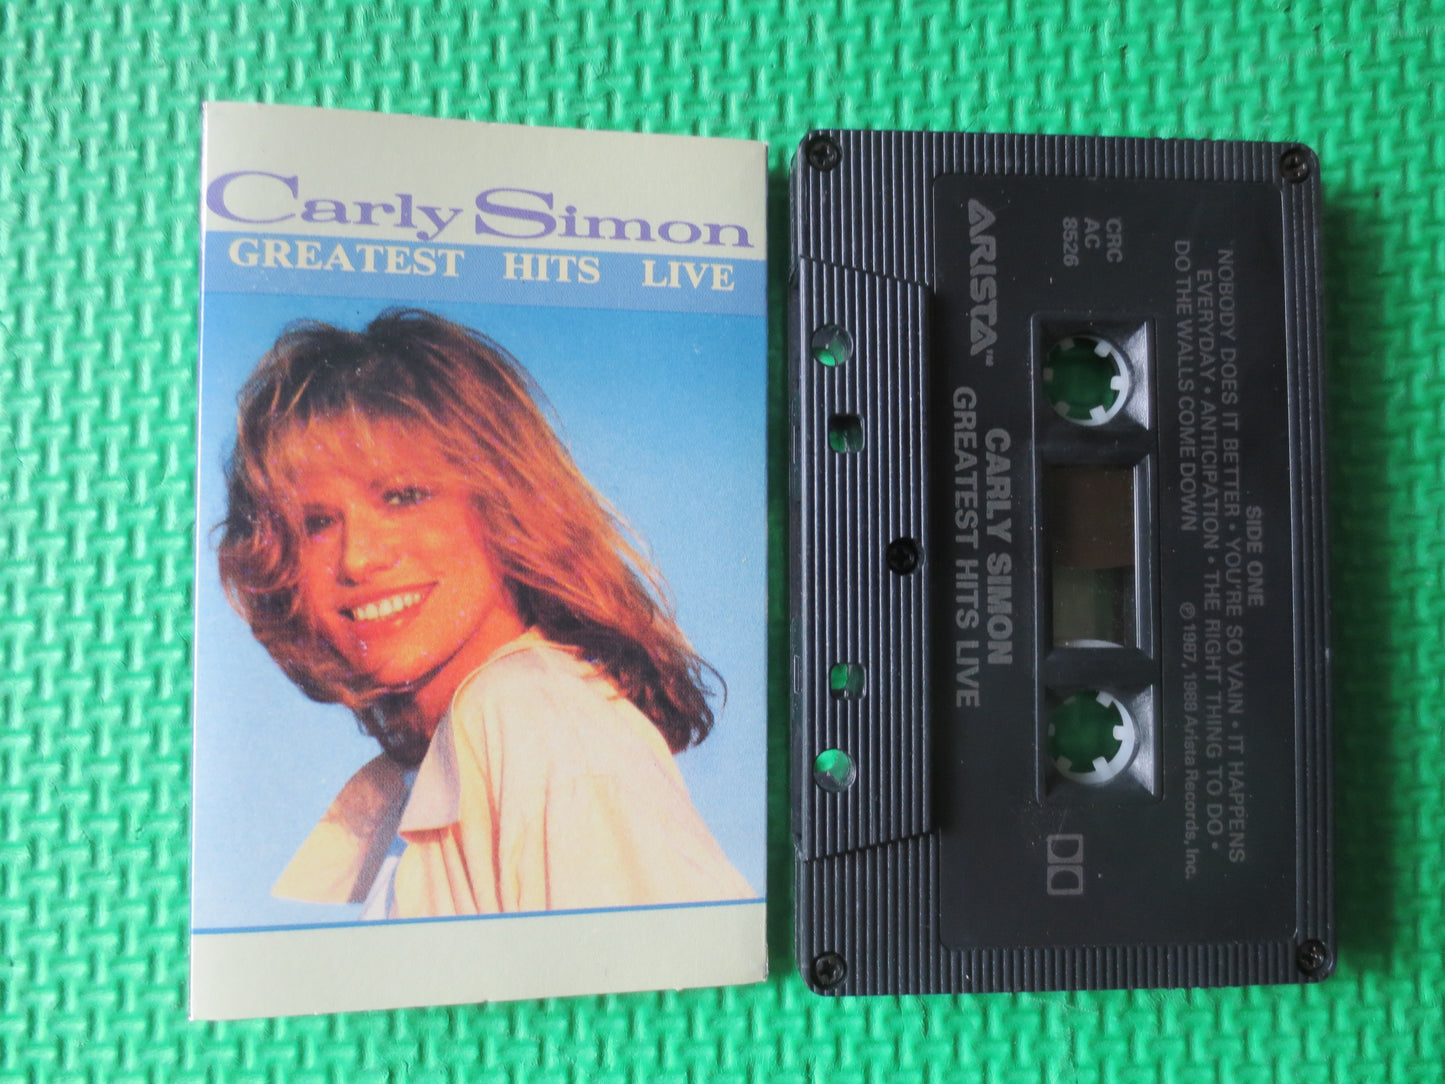 CARLY SIMON, GREATEST Hits, Carly Simon Tape, Carly Simon Album, Tape Cassette, Jazz Cassette, Cassette Music, 1988 Cassette